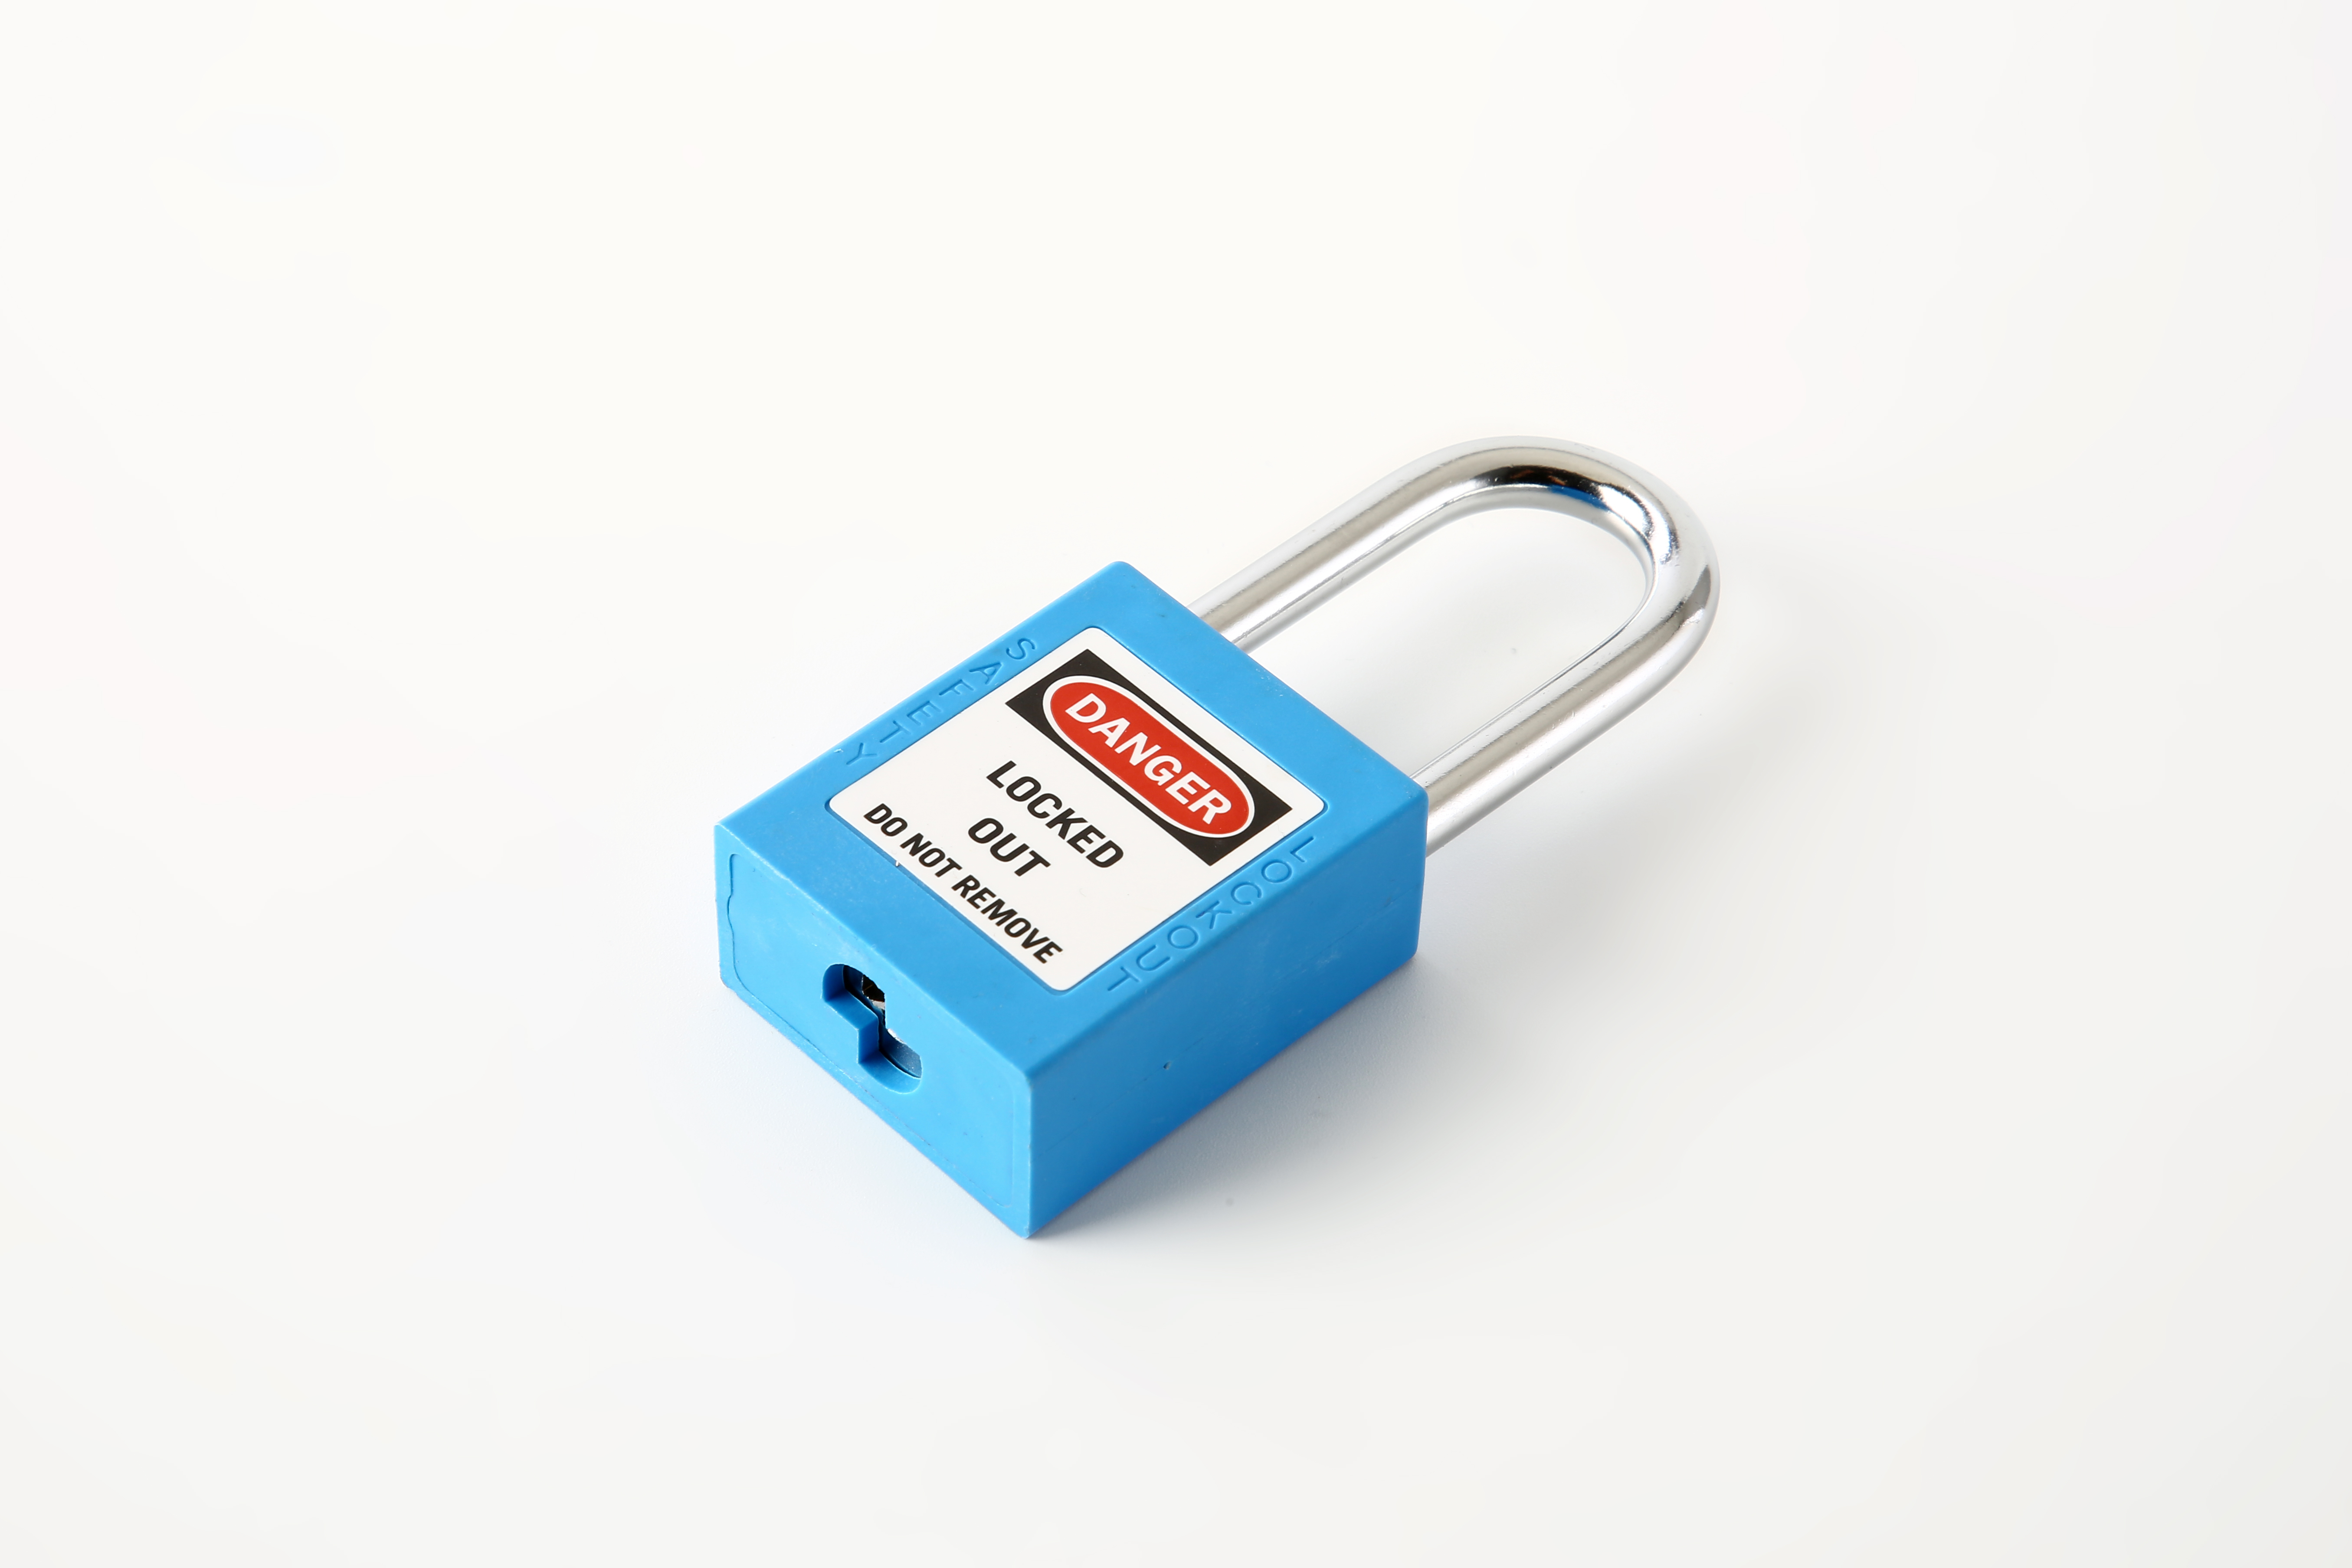 Industrial Safety Locks from Established Manufacturers are More Reliable